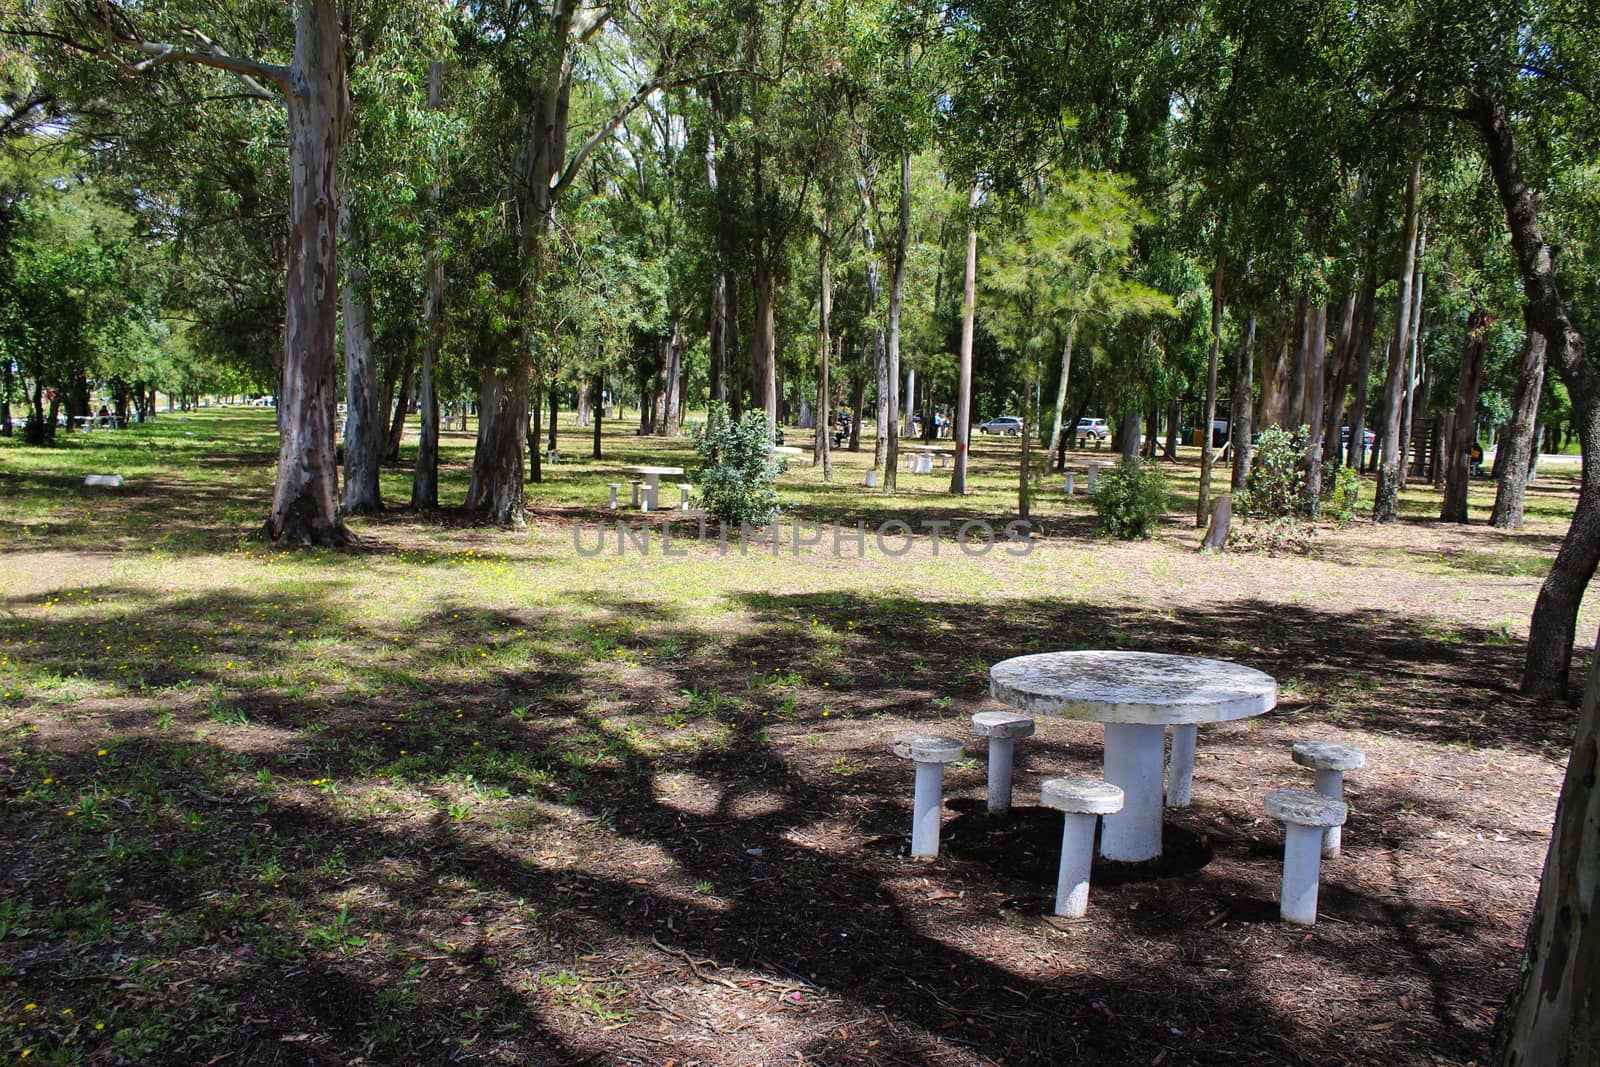 A table in the park, a space for socializing. Park in Beja, Portugal.